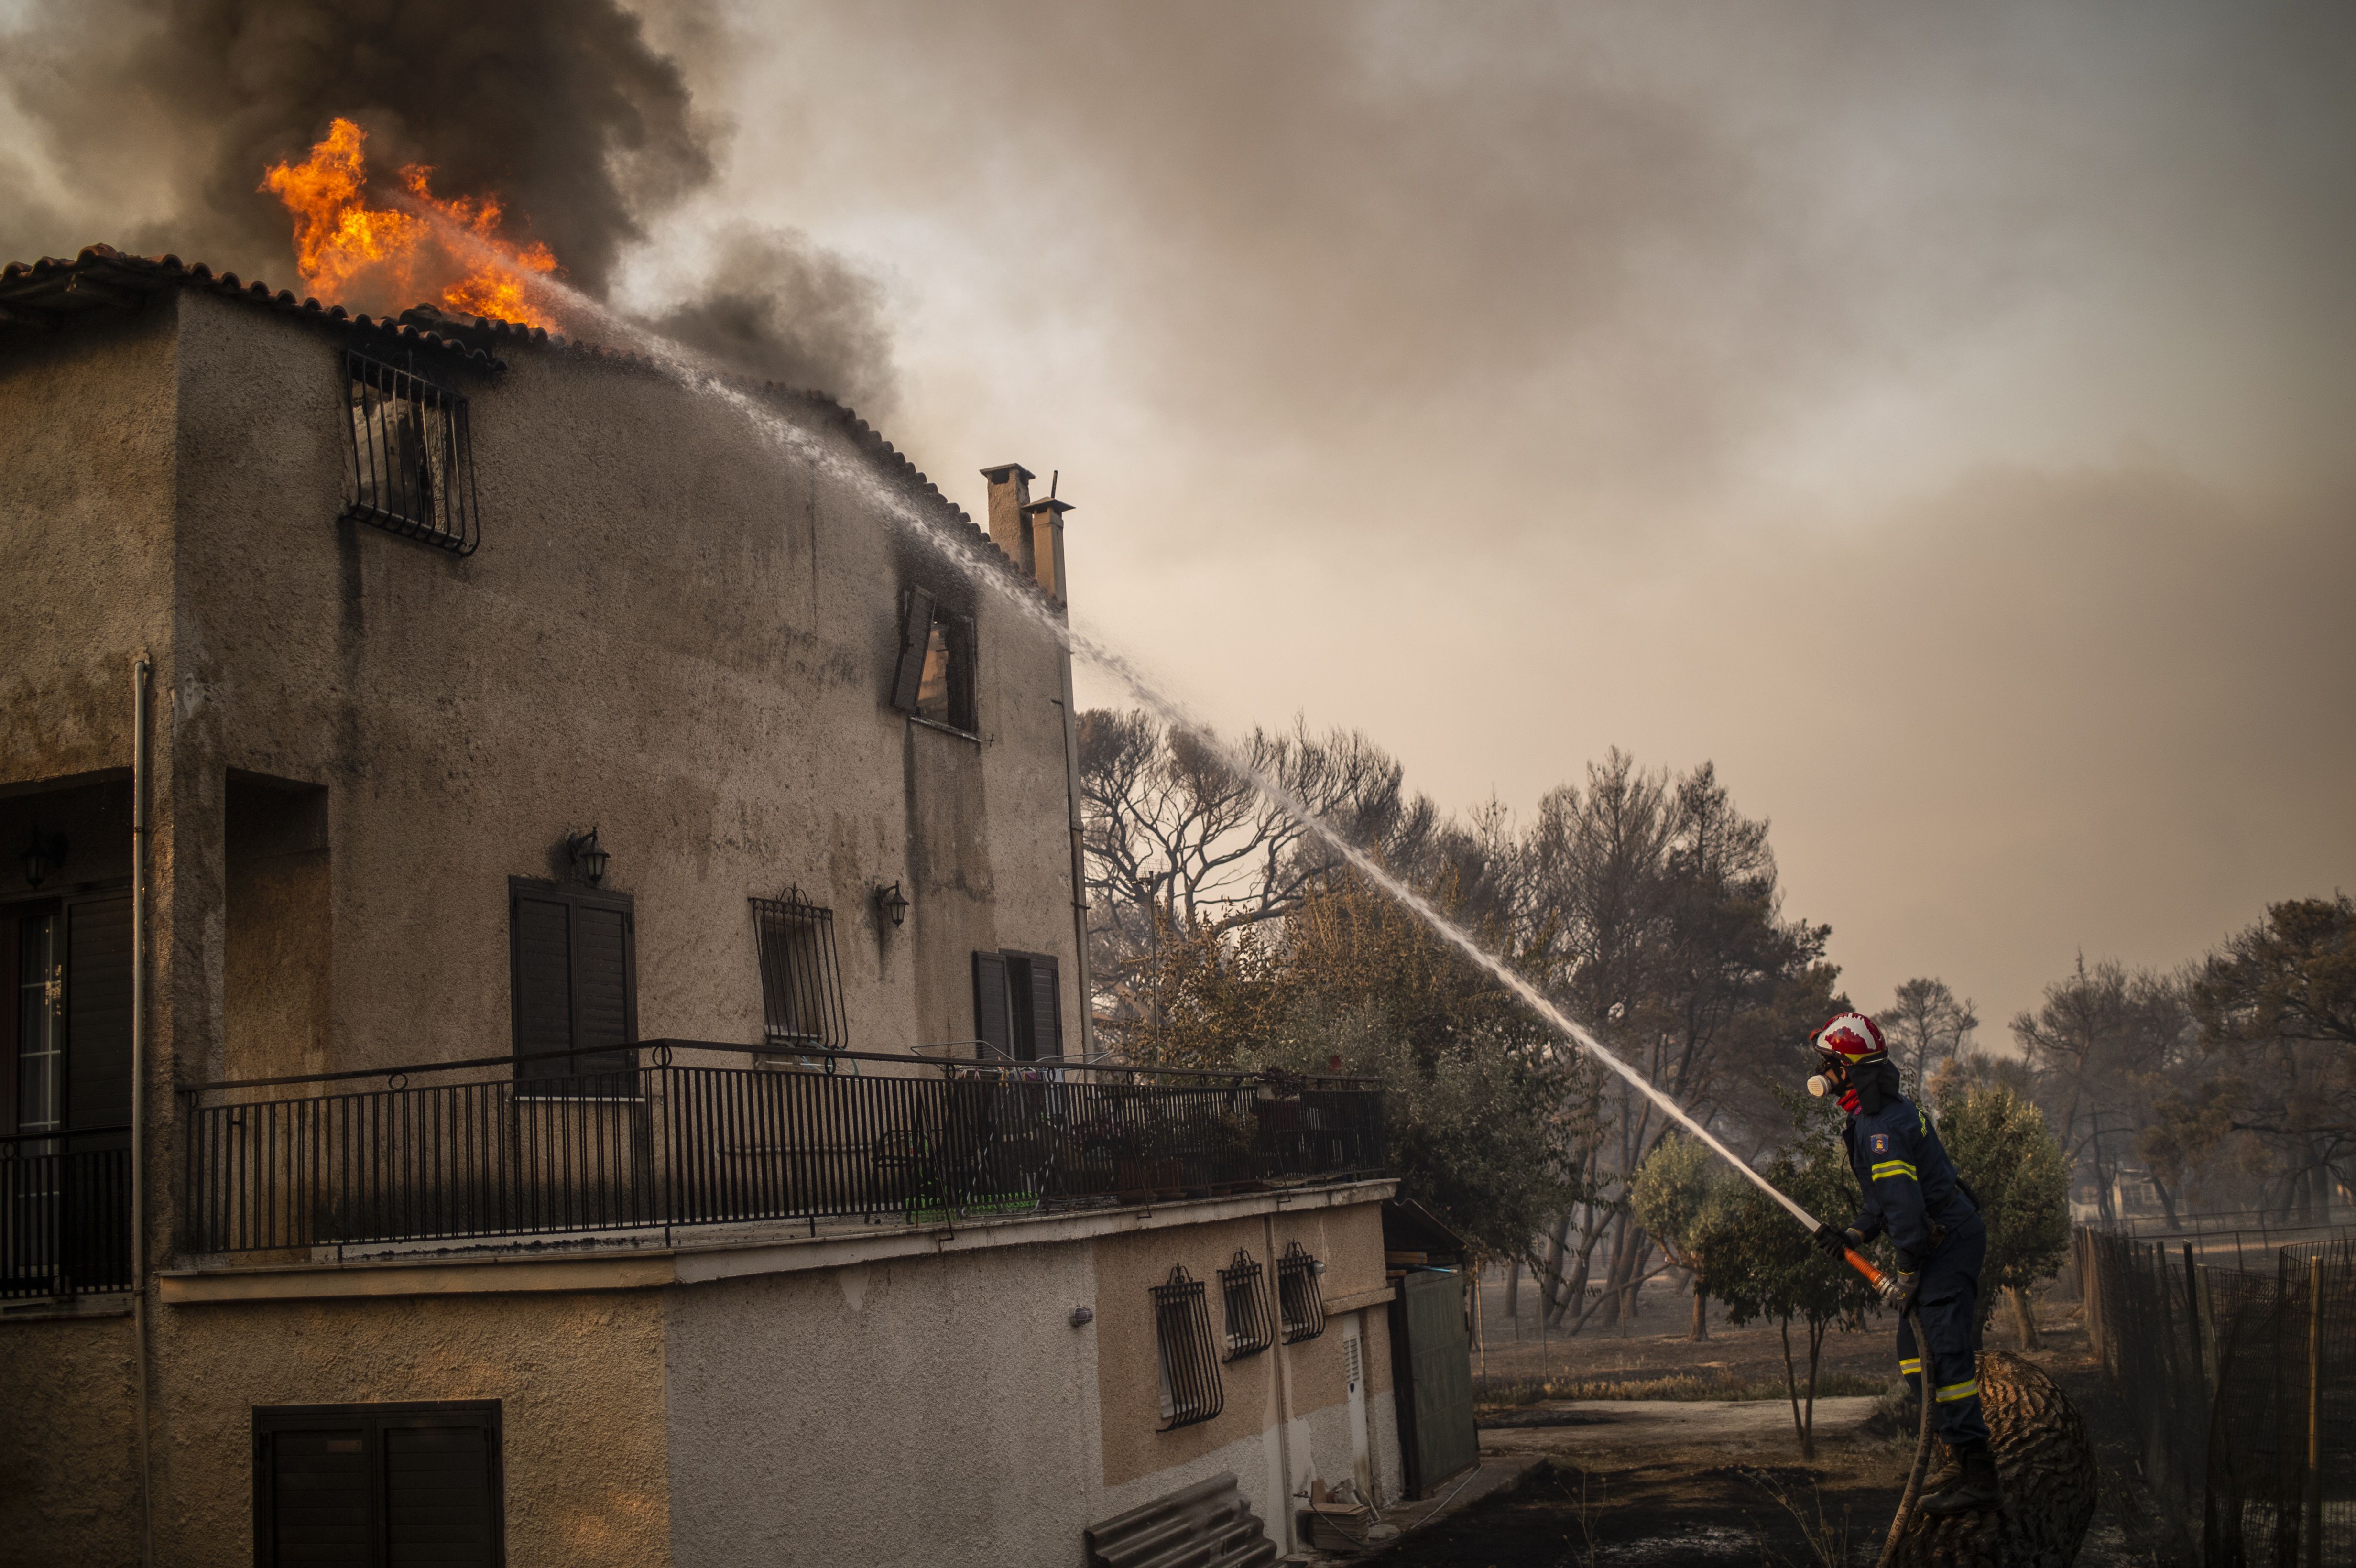 Picture of a house with a fire in the roof and a firefighter with a hose